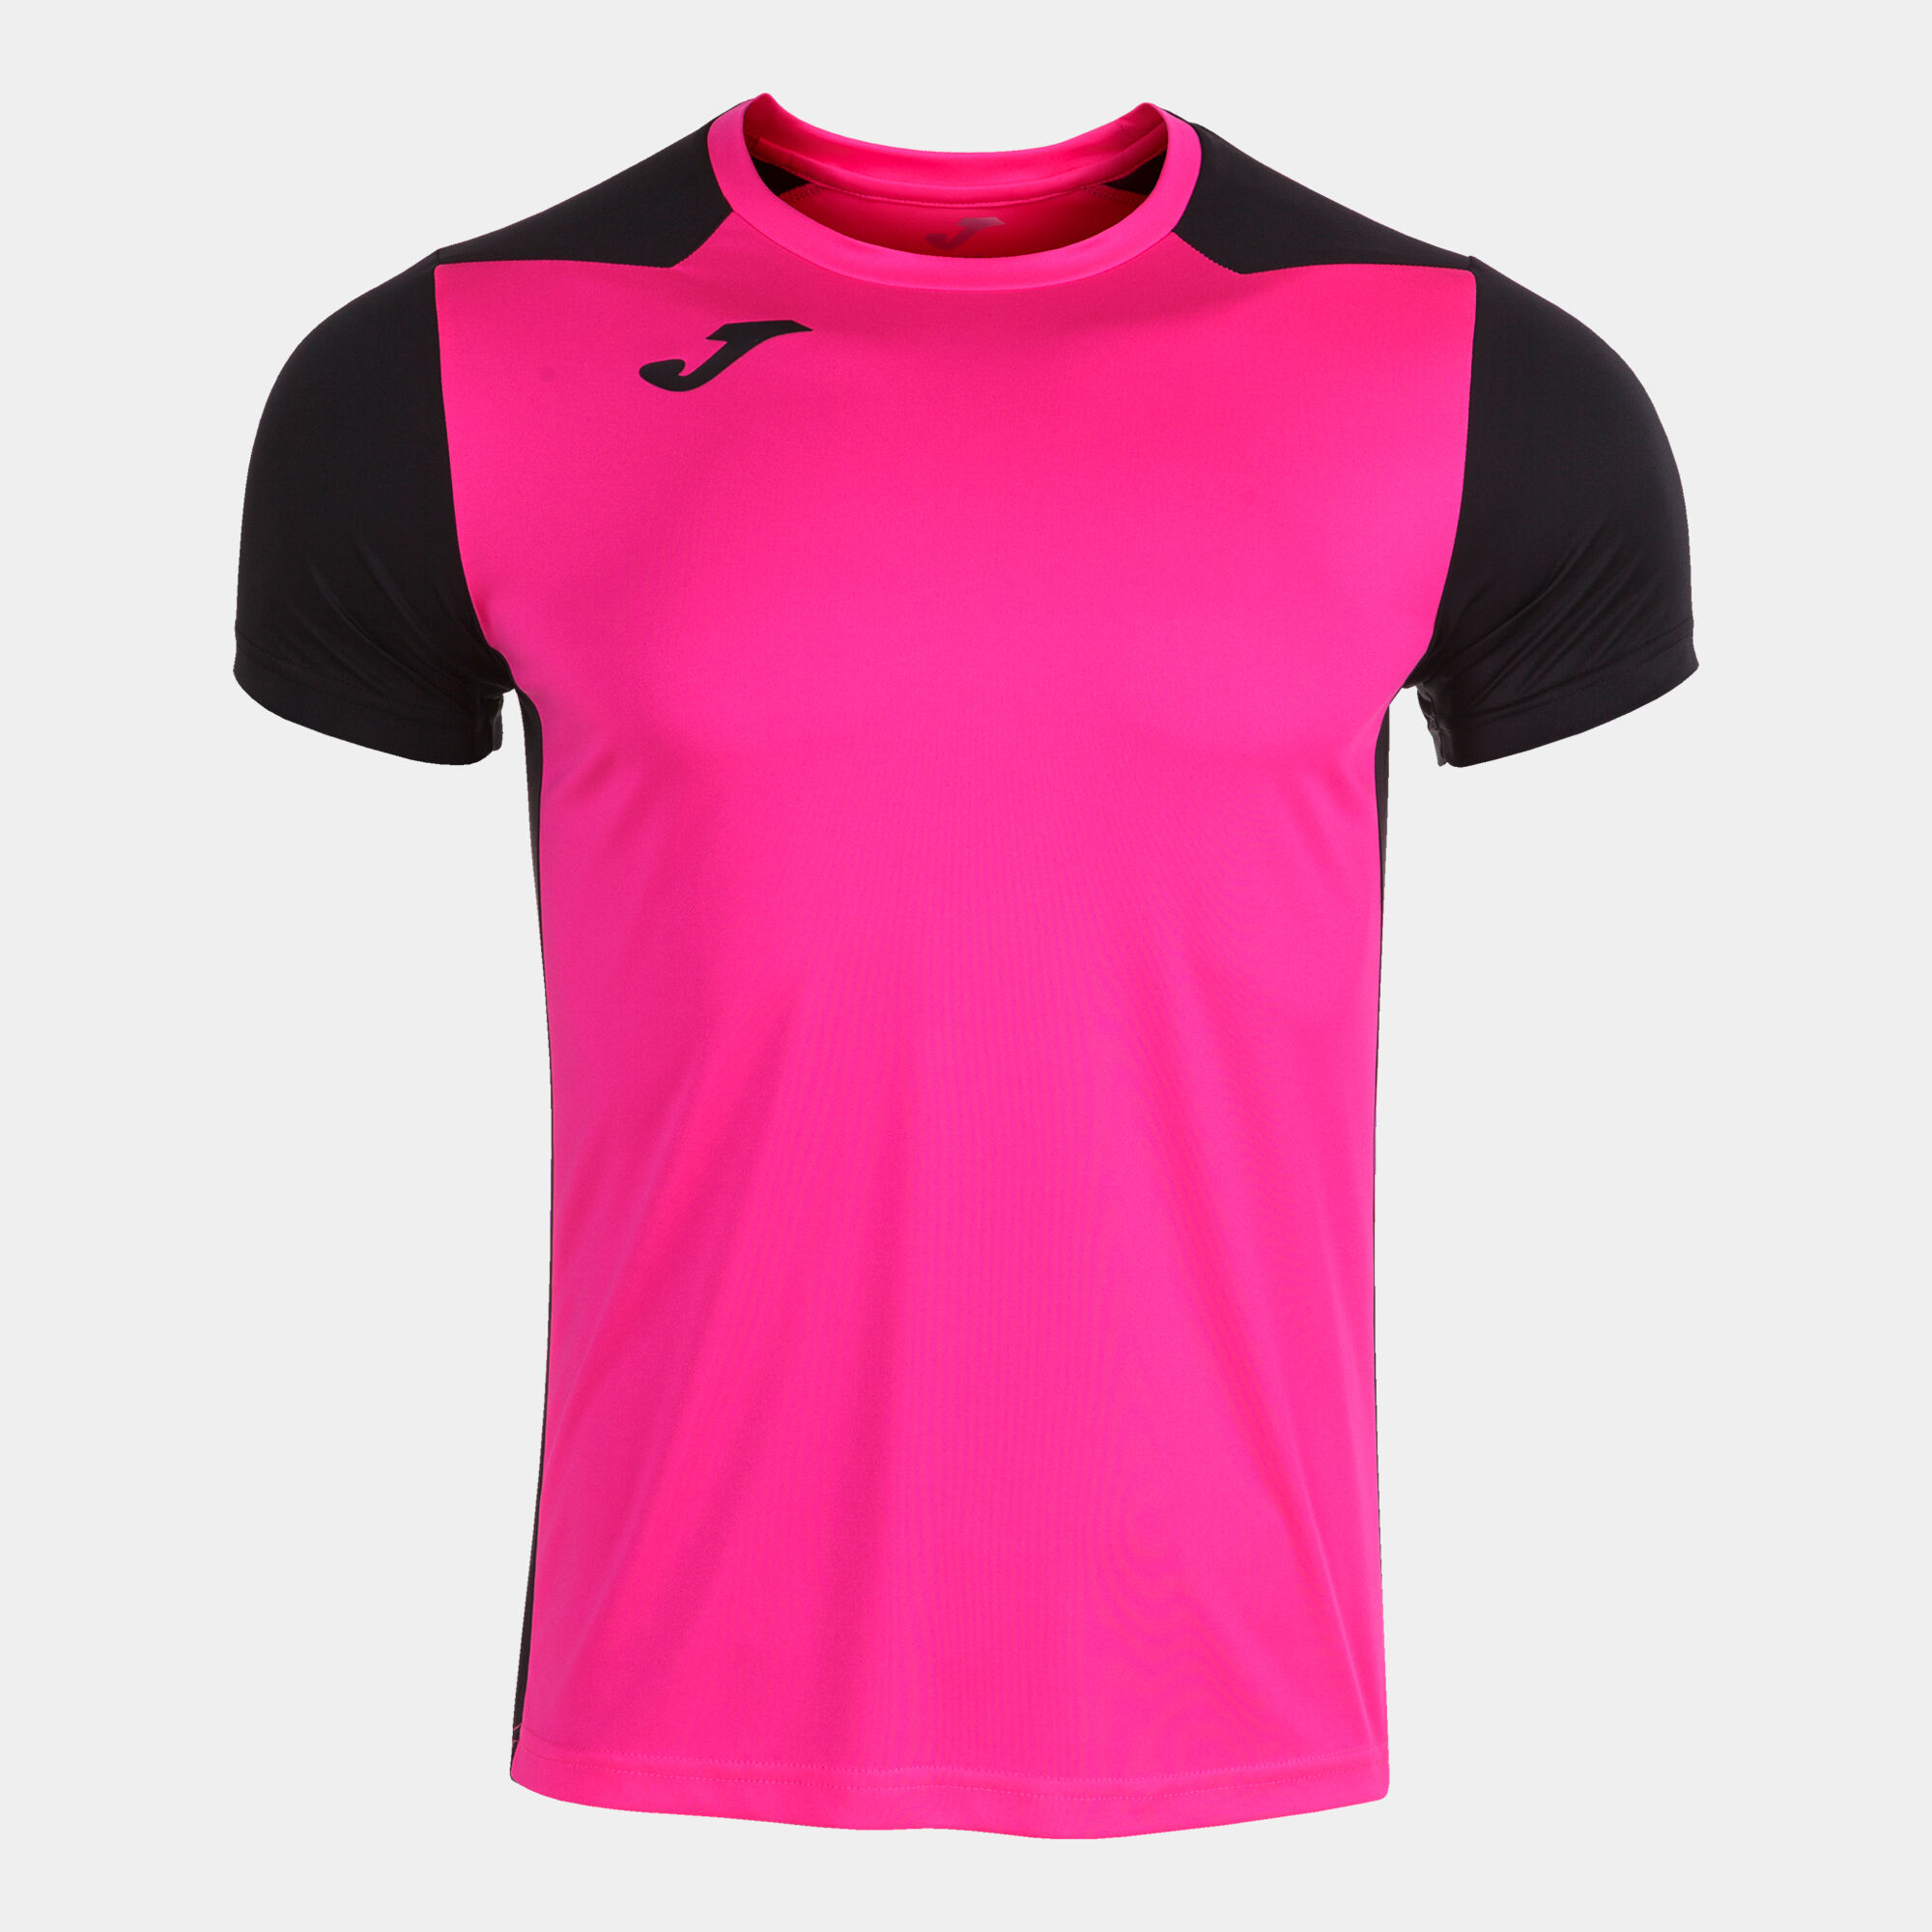 MAILLOT MANCHES COURTES HOMME RECORD II ROSE FLUO NOIR